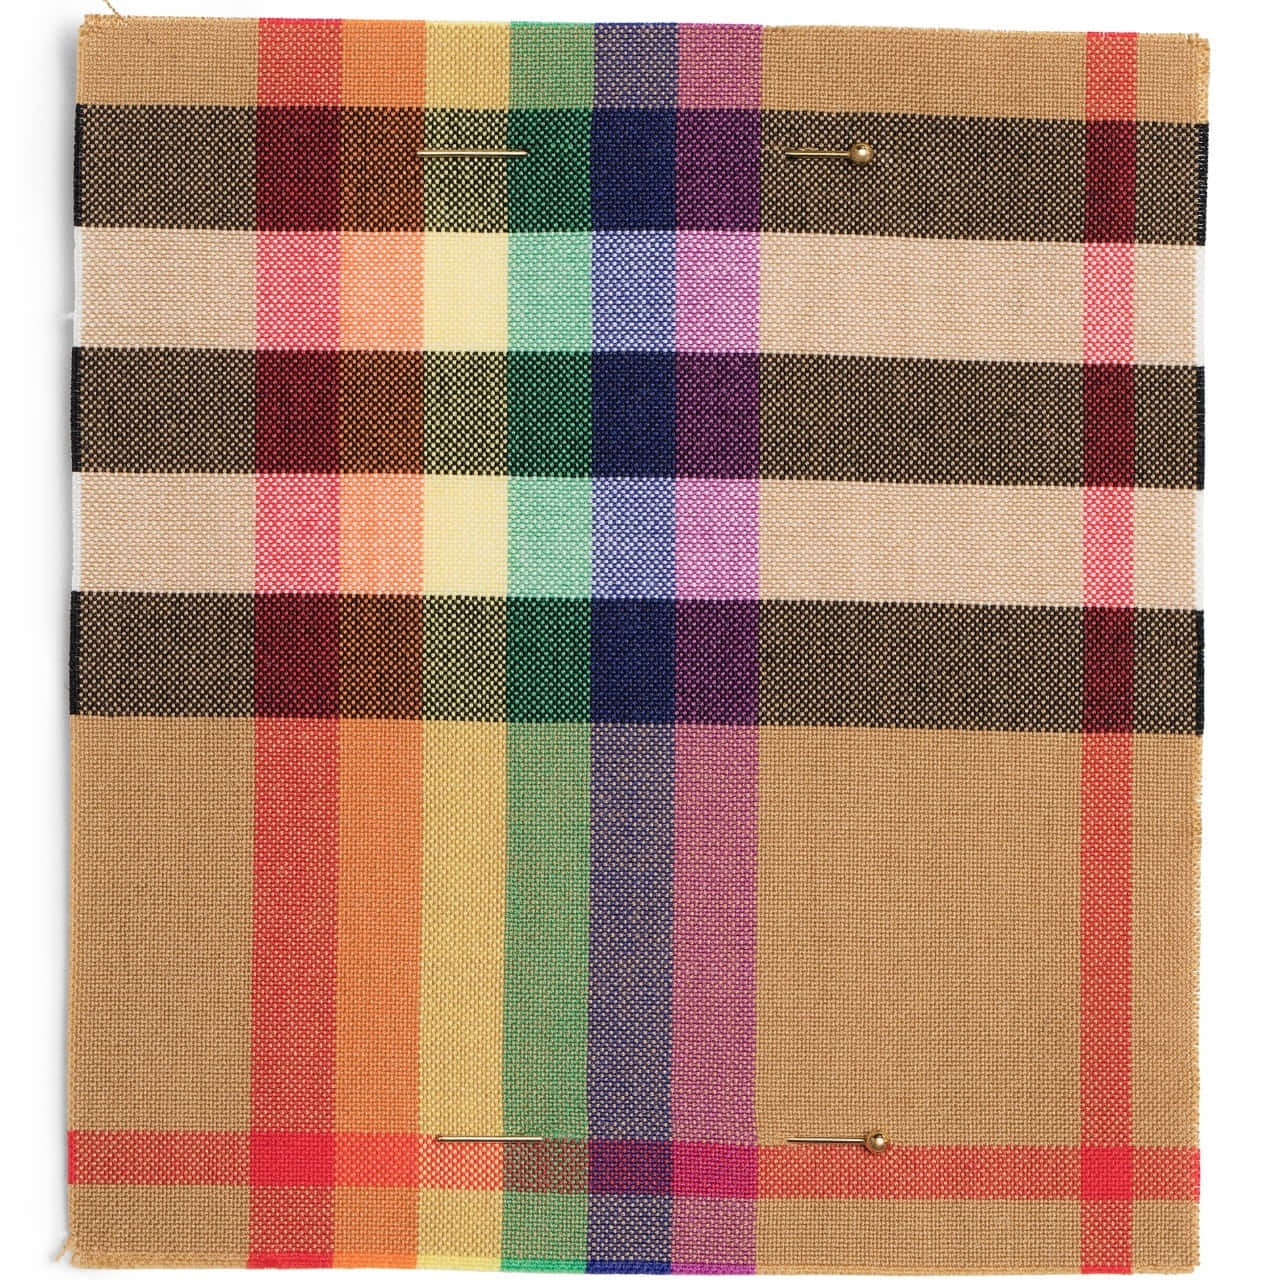 A Colorful Plaid Scarf With A Rainbow Pattern